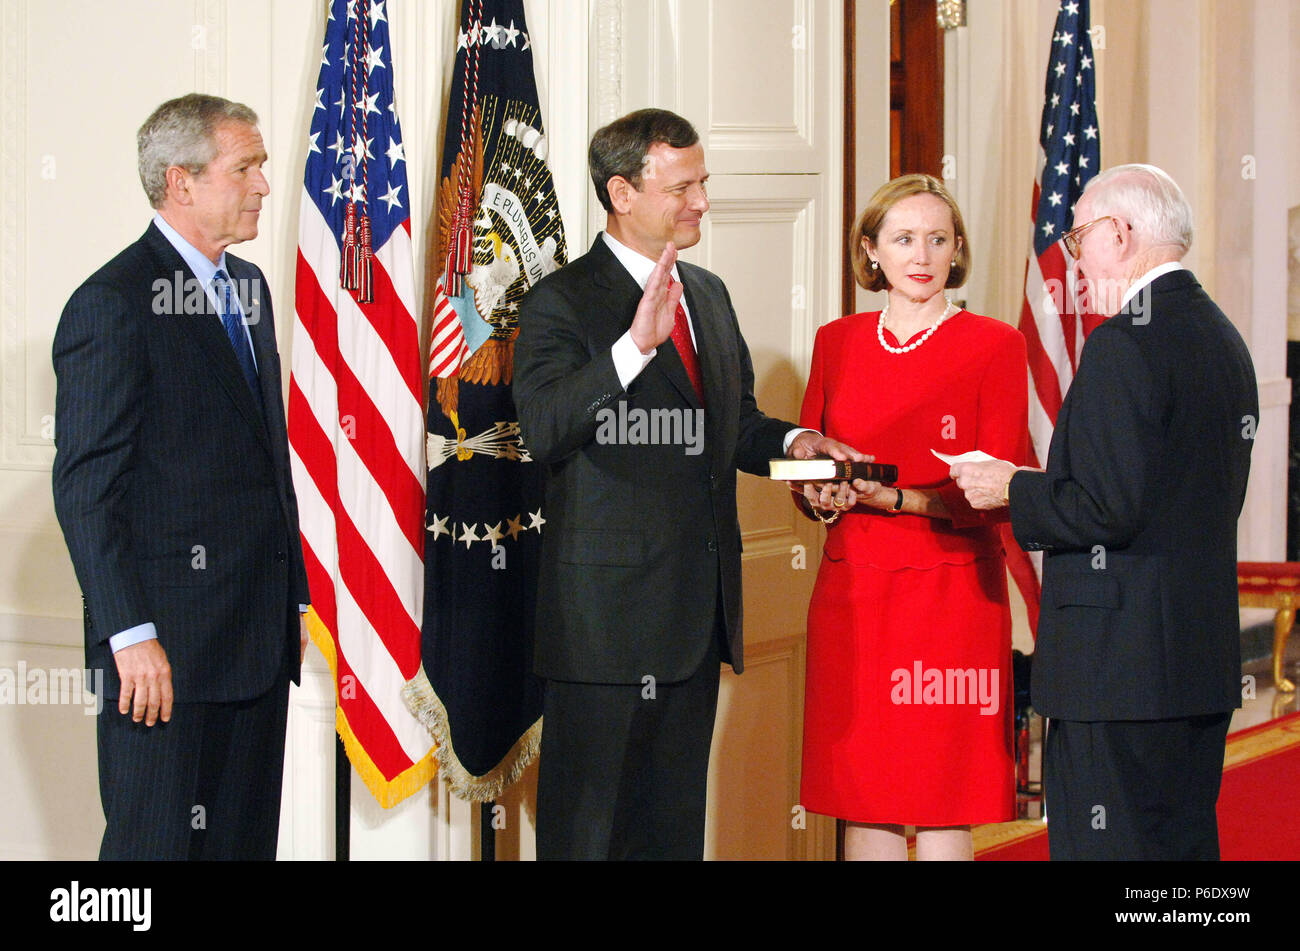 Washington, District of Columbia, USA. 29th Sep, 2005. John Roberts is sworn in as the 17th Chief Justice of the .Supreme Court in the East Room of the White House by .Supreme Court Justice Stevens as his wfe holds the bible and .Pres. Bush looks on.9-29-2005. - - 2005.I10084CB Credit: Christy Bowe/Globe Photos/ZUMAPRESS.com/Alamy Live News Stock Photo